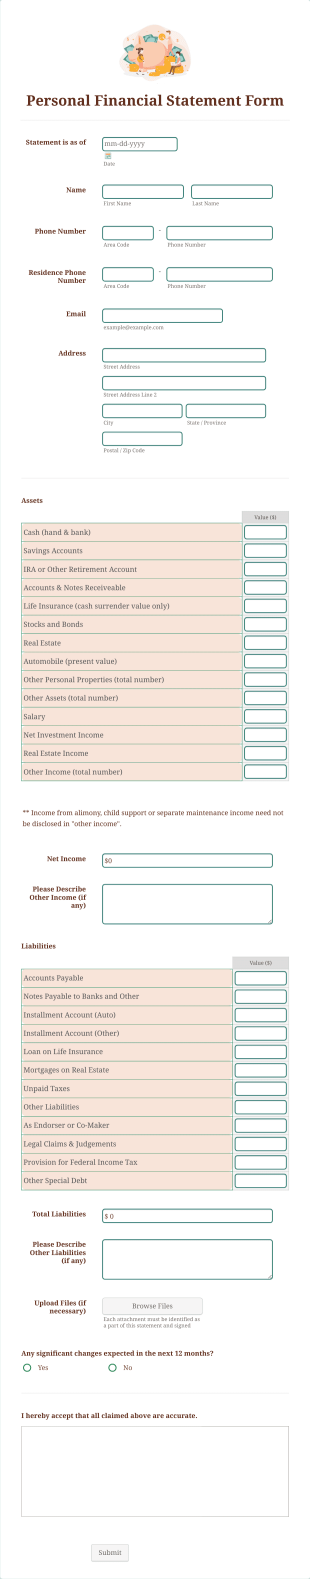 Personal Financial Statement Form Template